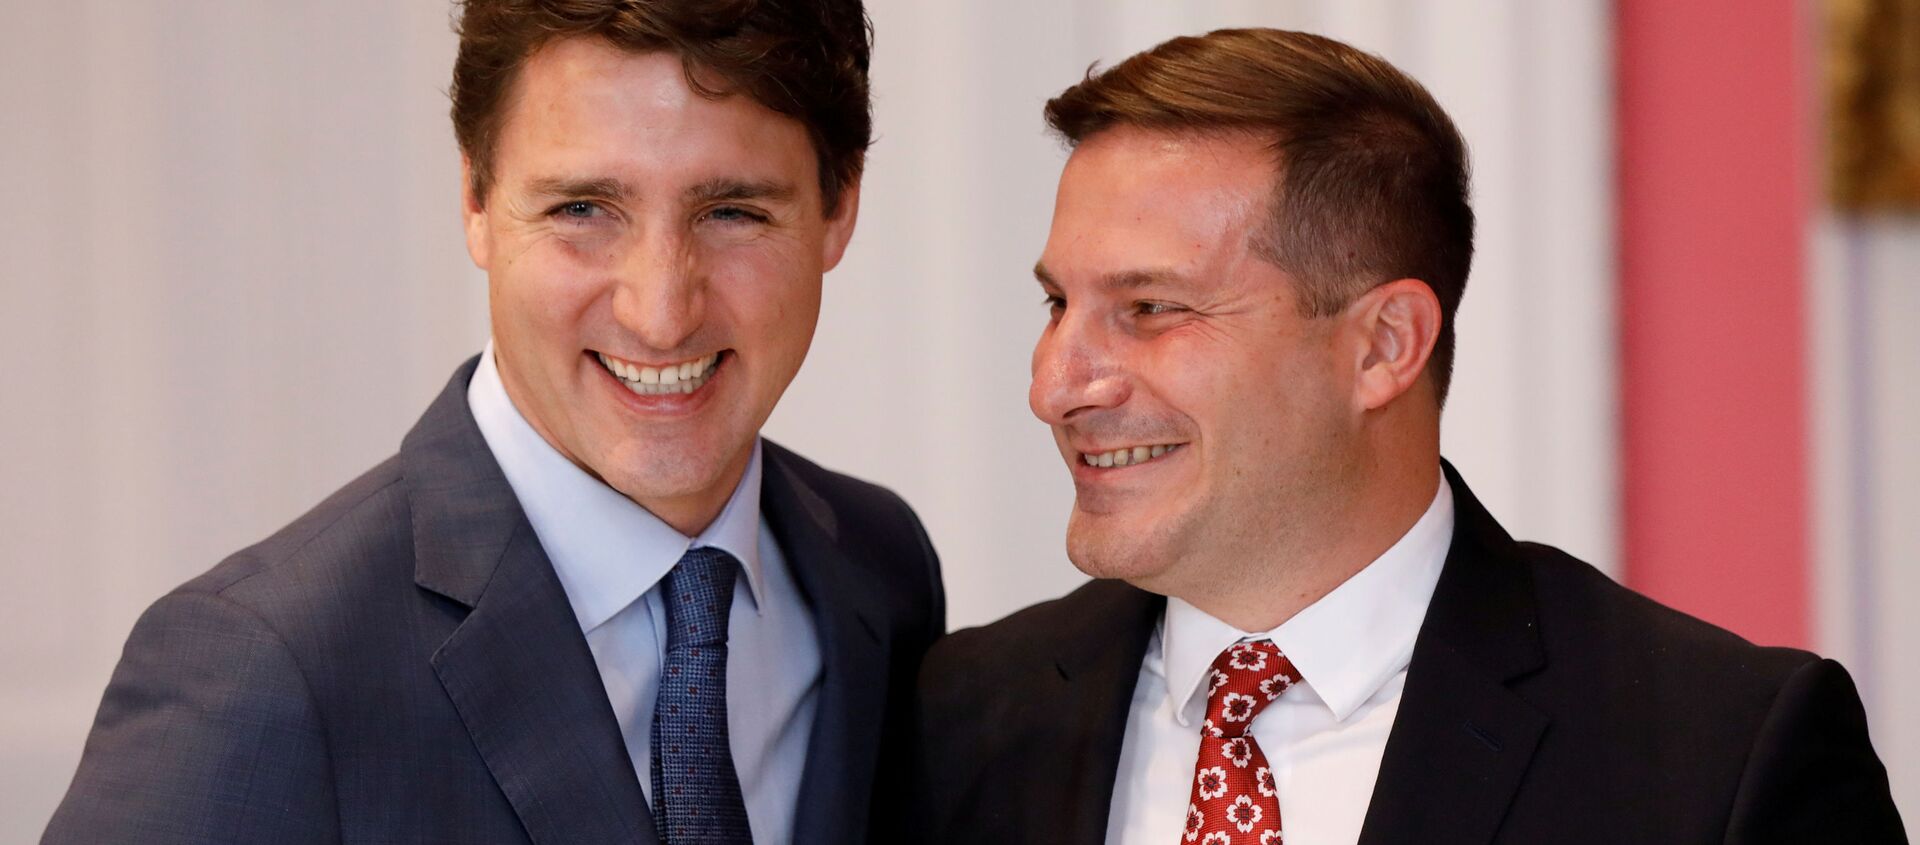 Marco Mendicino poses with Canada's Prime Minister Justin Trudeau after being sworn-in as Minister of Immigration, Refugees and Citizenship during the presentation of Trudeau's new cabinet, at Rideau Hall in Ottawa, Ontario, Canada November 20, 2019. - Sputnik International, 1920, 30.10.2020